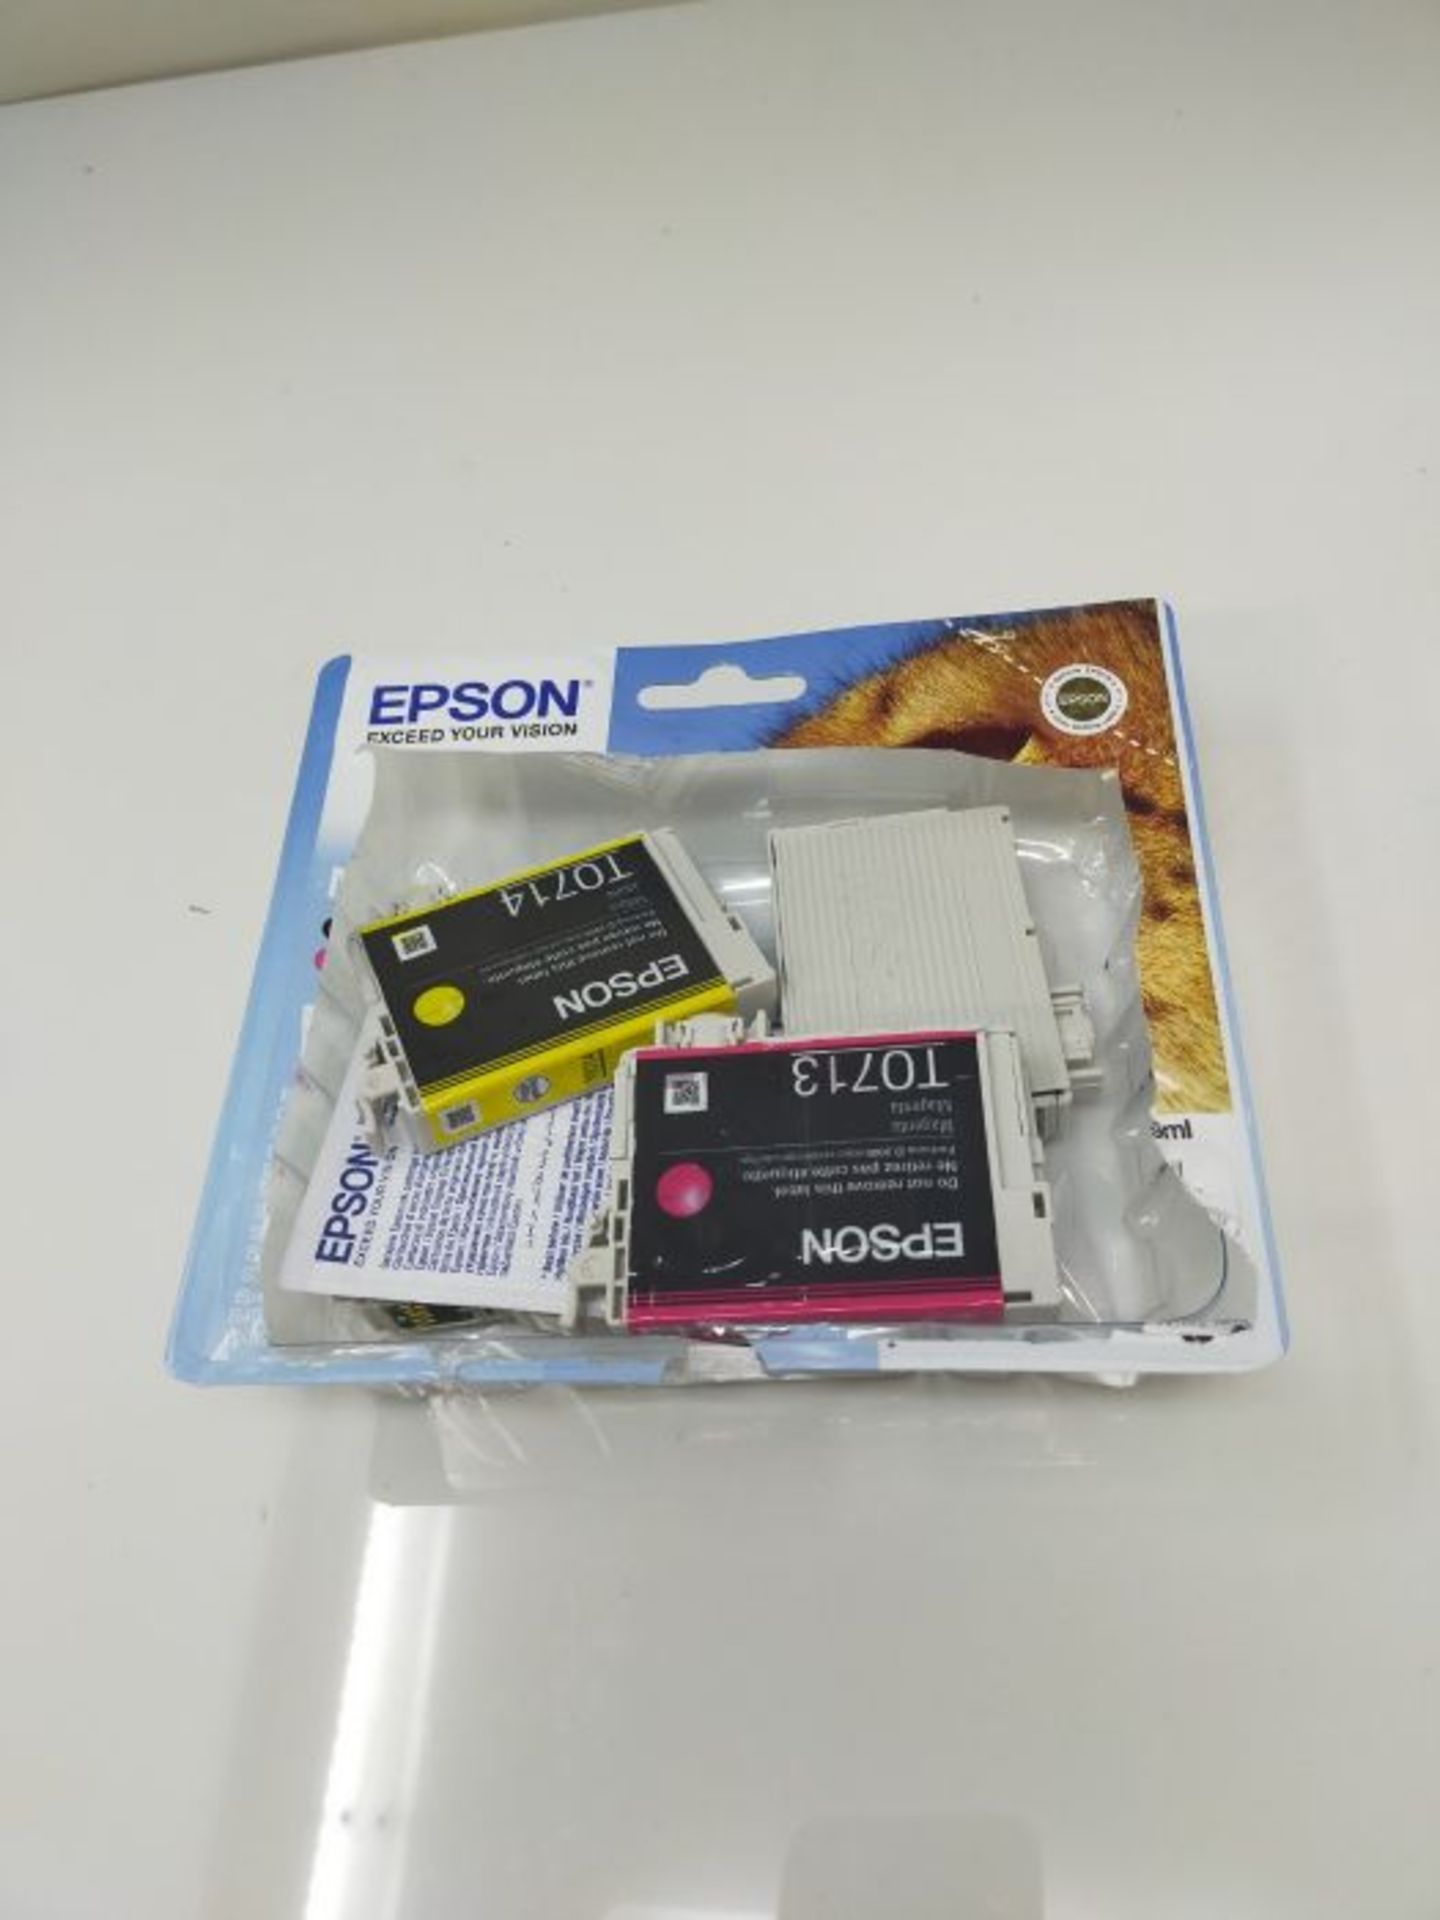 [CRACKED] EPSON Cheetah Ink Cartridge for Epson Stylus SX600FW Series - Assorted - Image 2 of 3